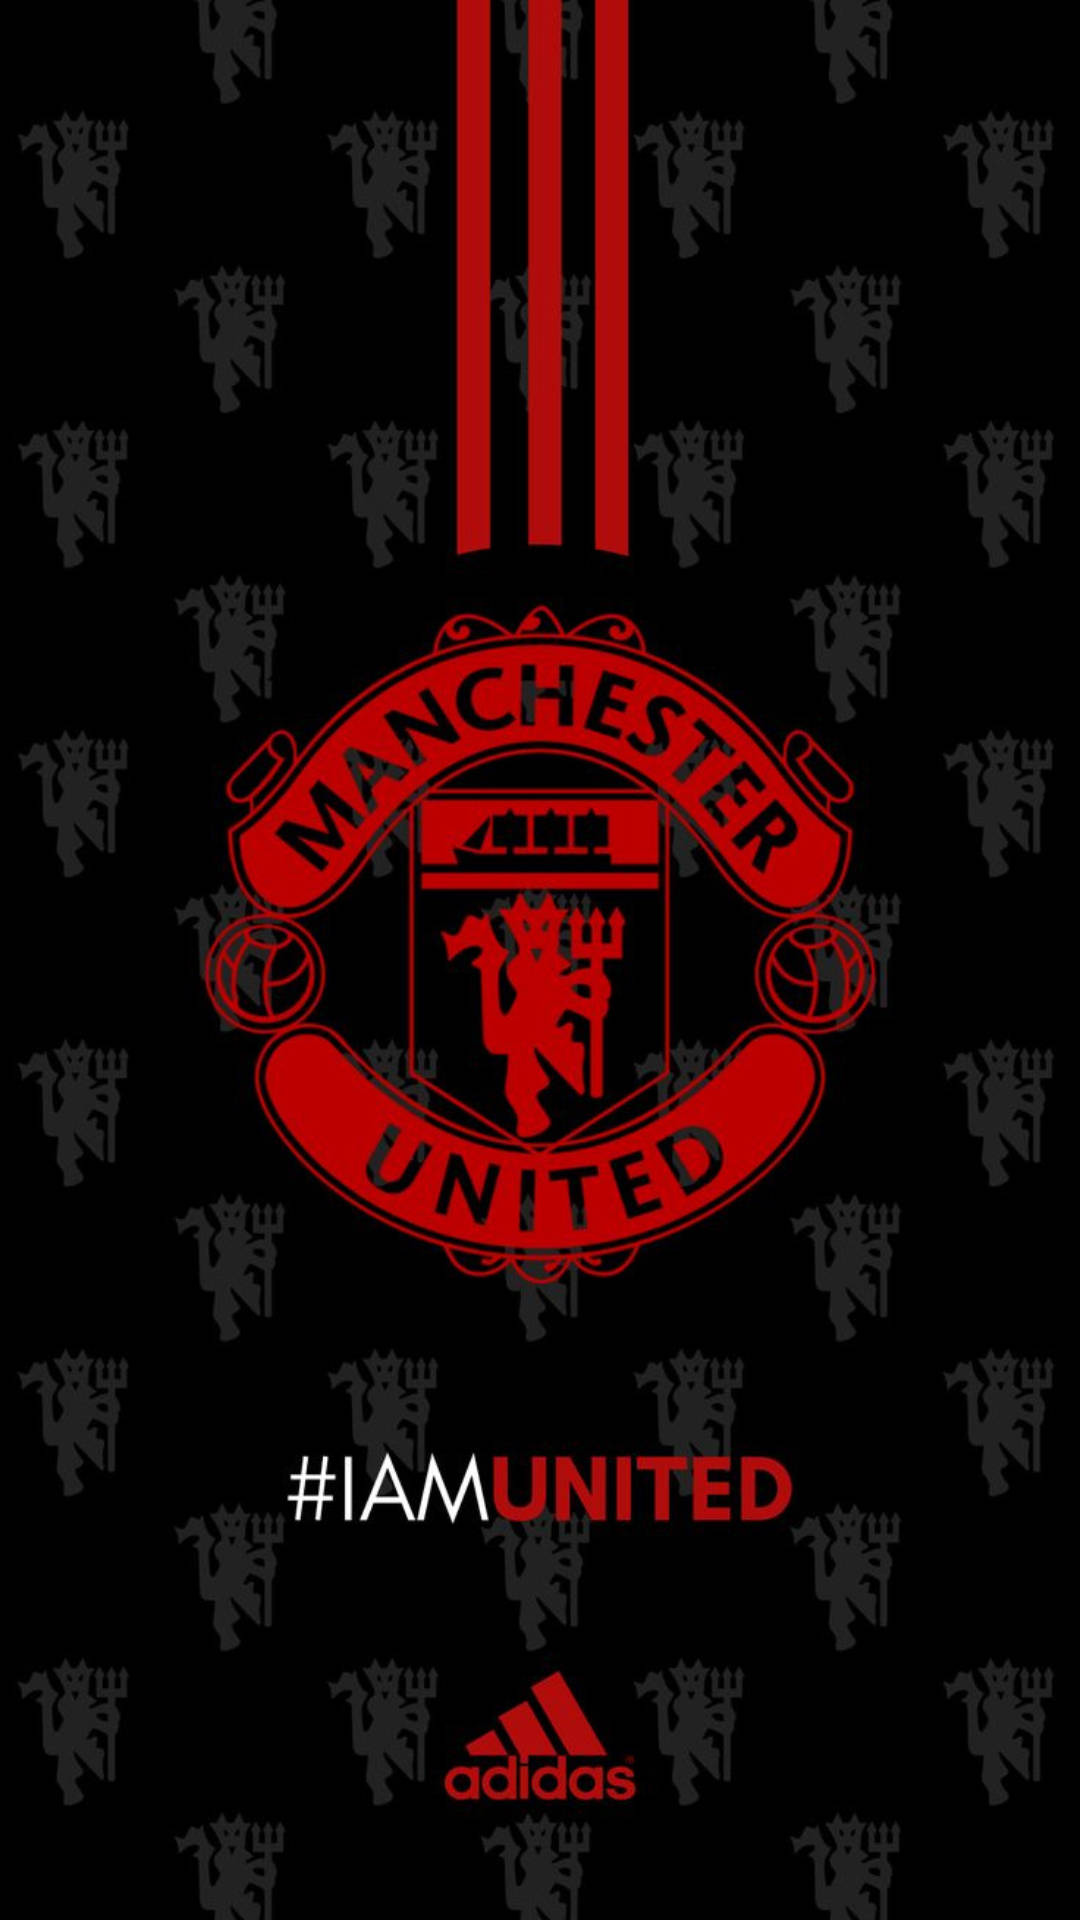 Adidas United Manchester United Mobile Wallpaper